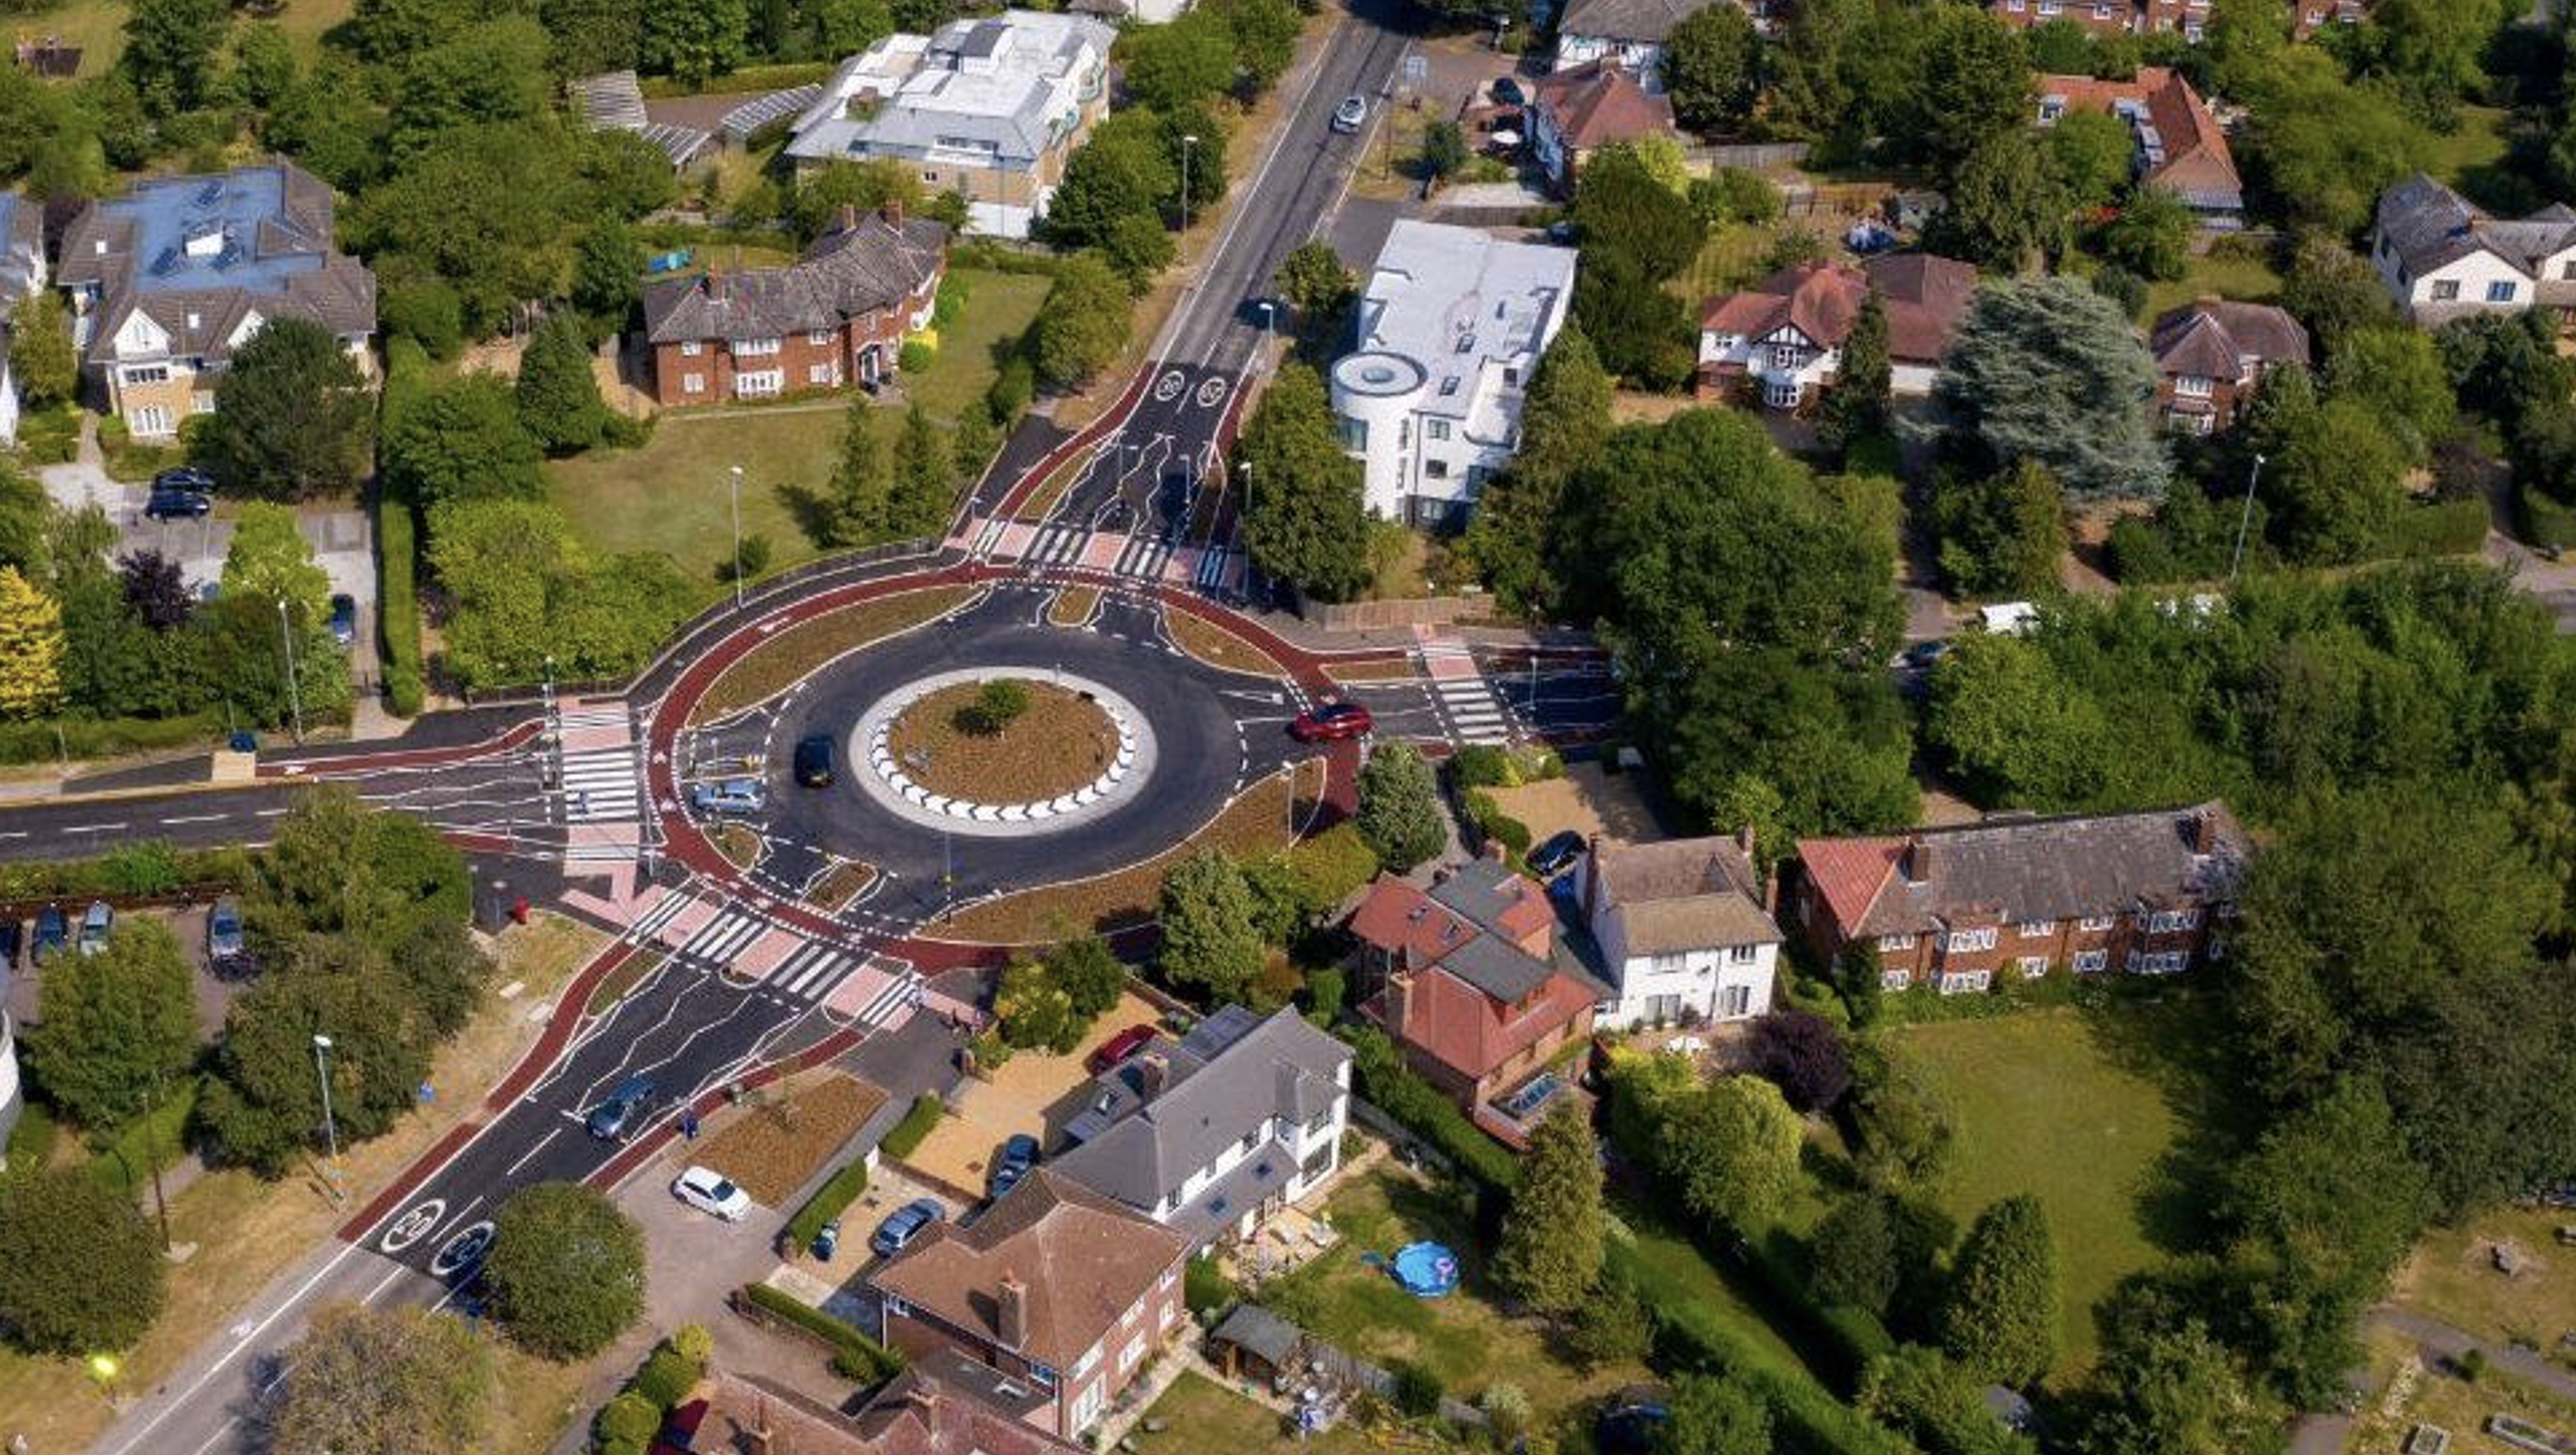 Example of a Dutch style roundabout in Cambridge England.